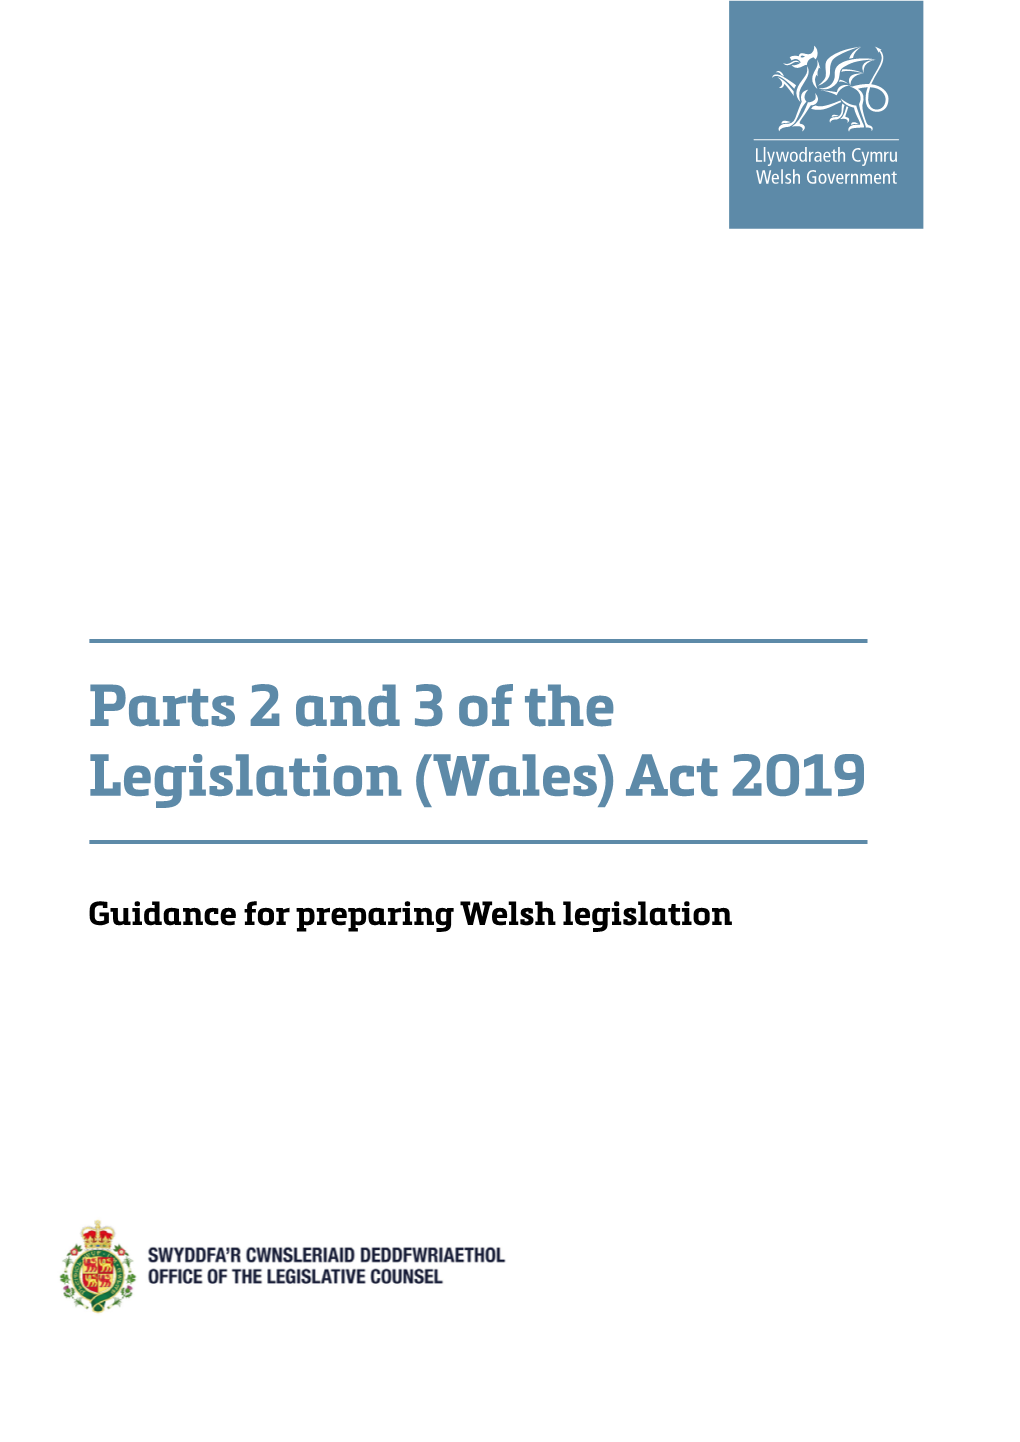 (Wales) Act 2019: Guidance for Preparing Welsh